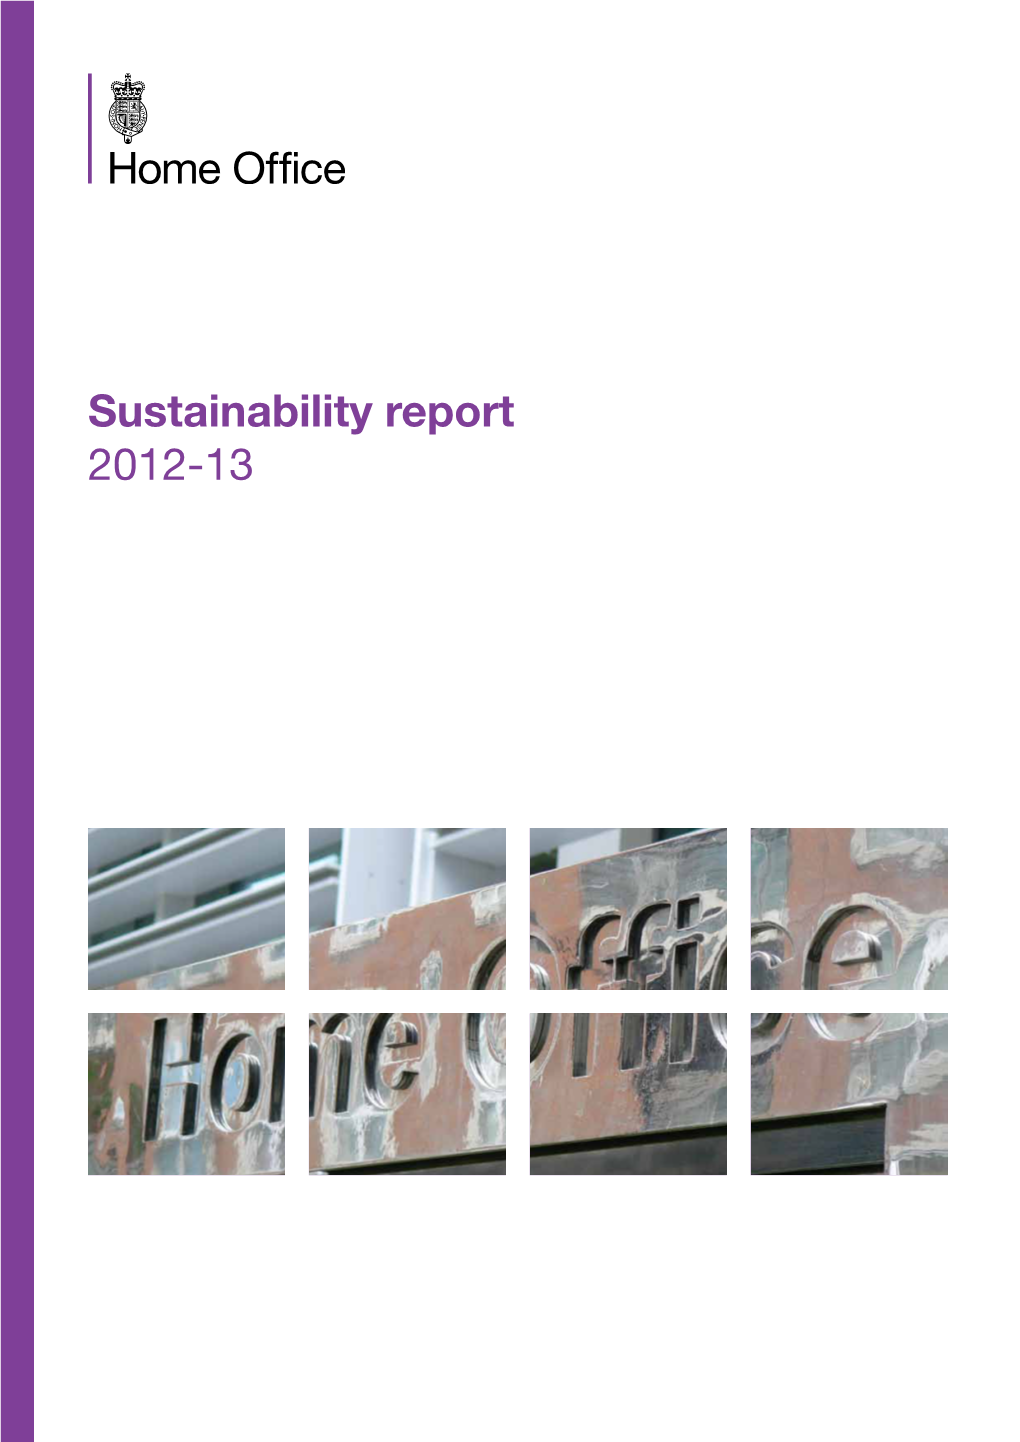 Sustainability Report 2012-13 Contact Us